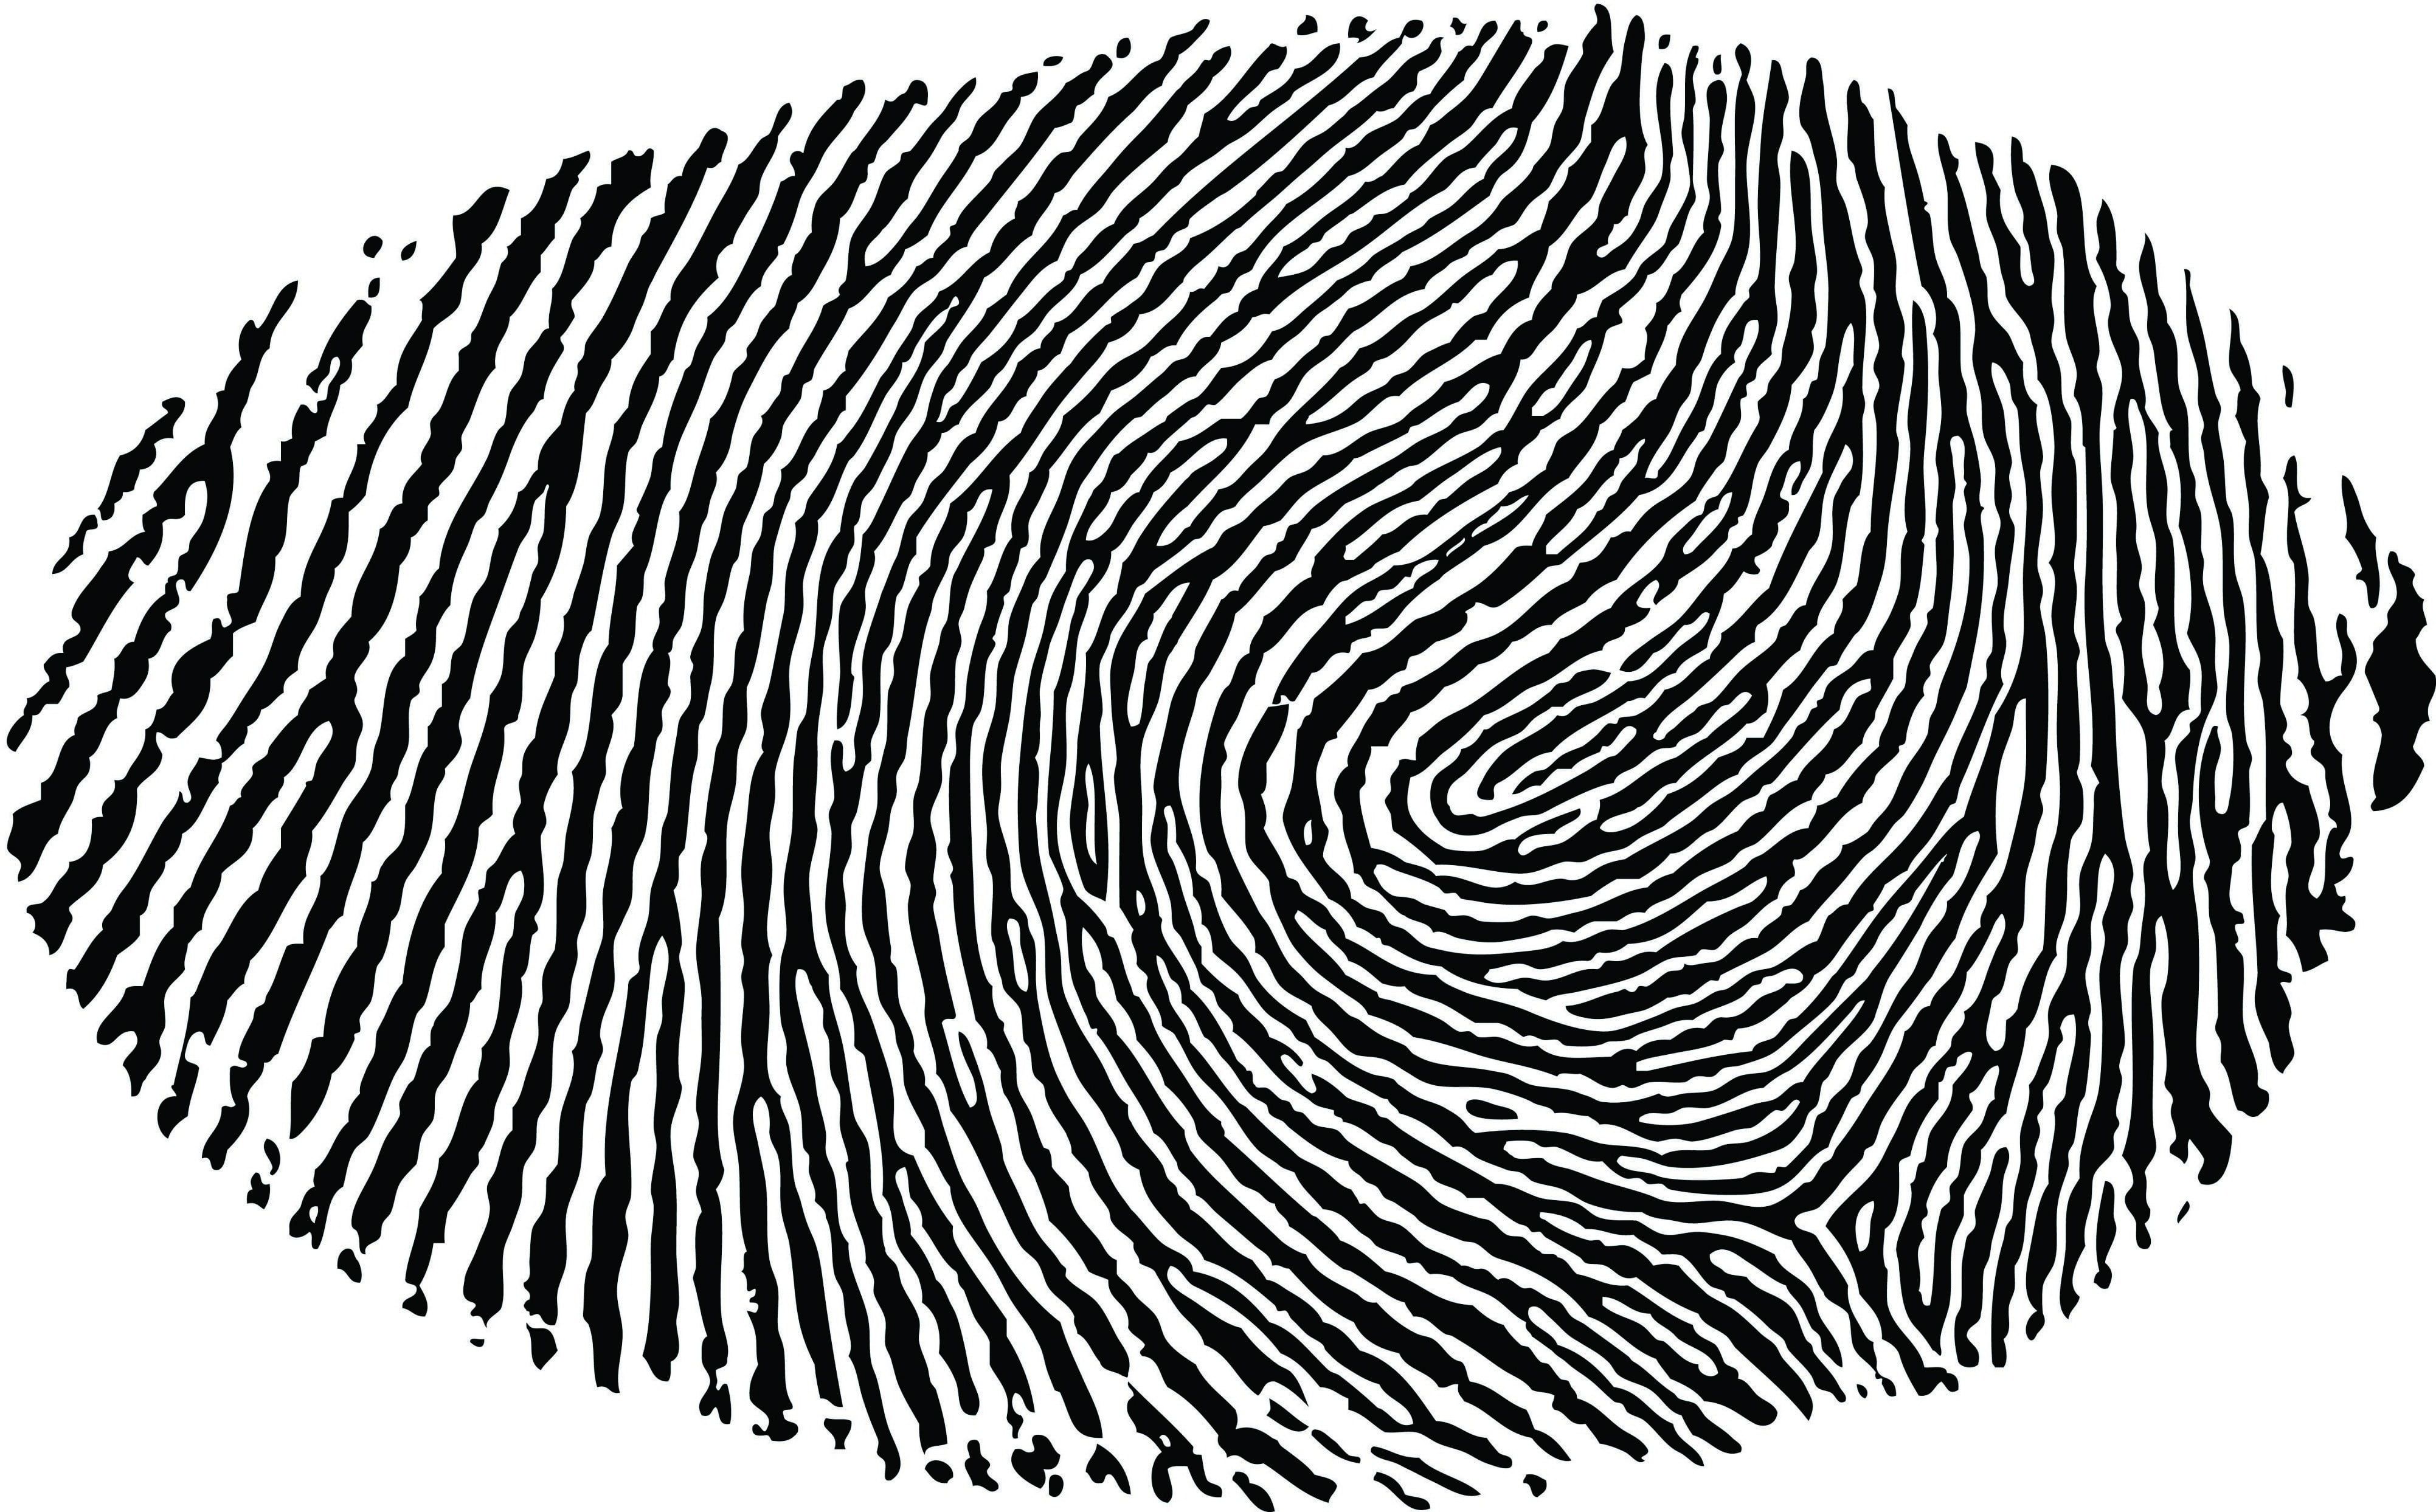 Abstract Finger Print Wallpapers